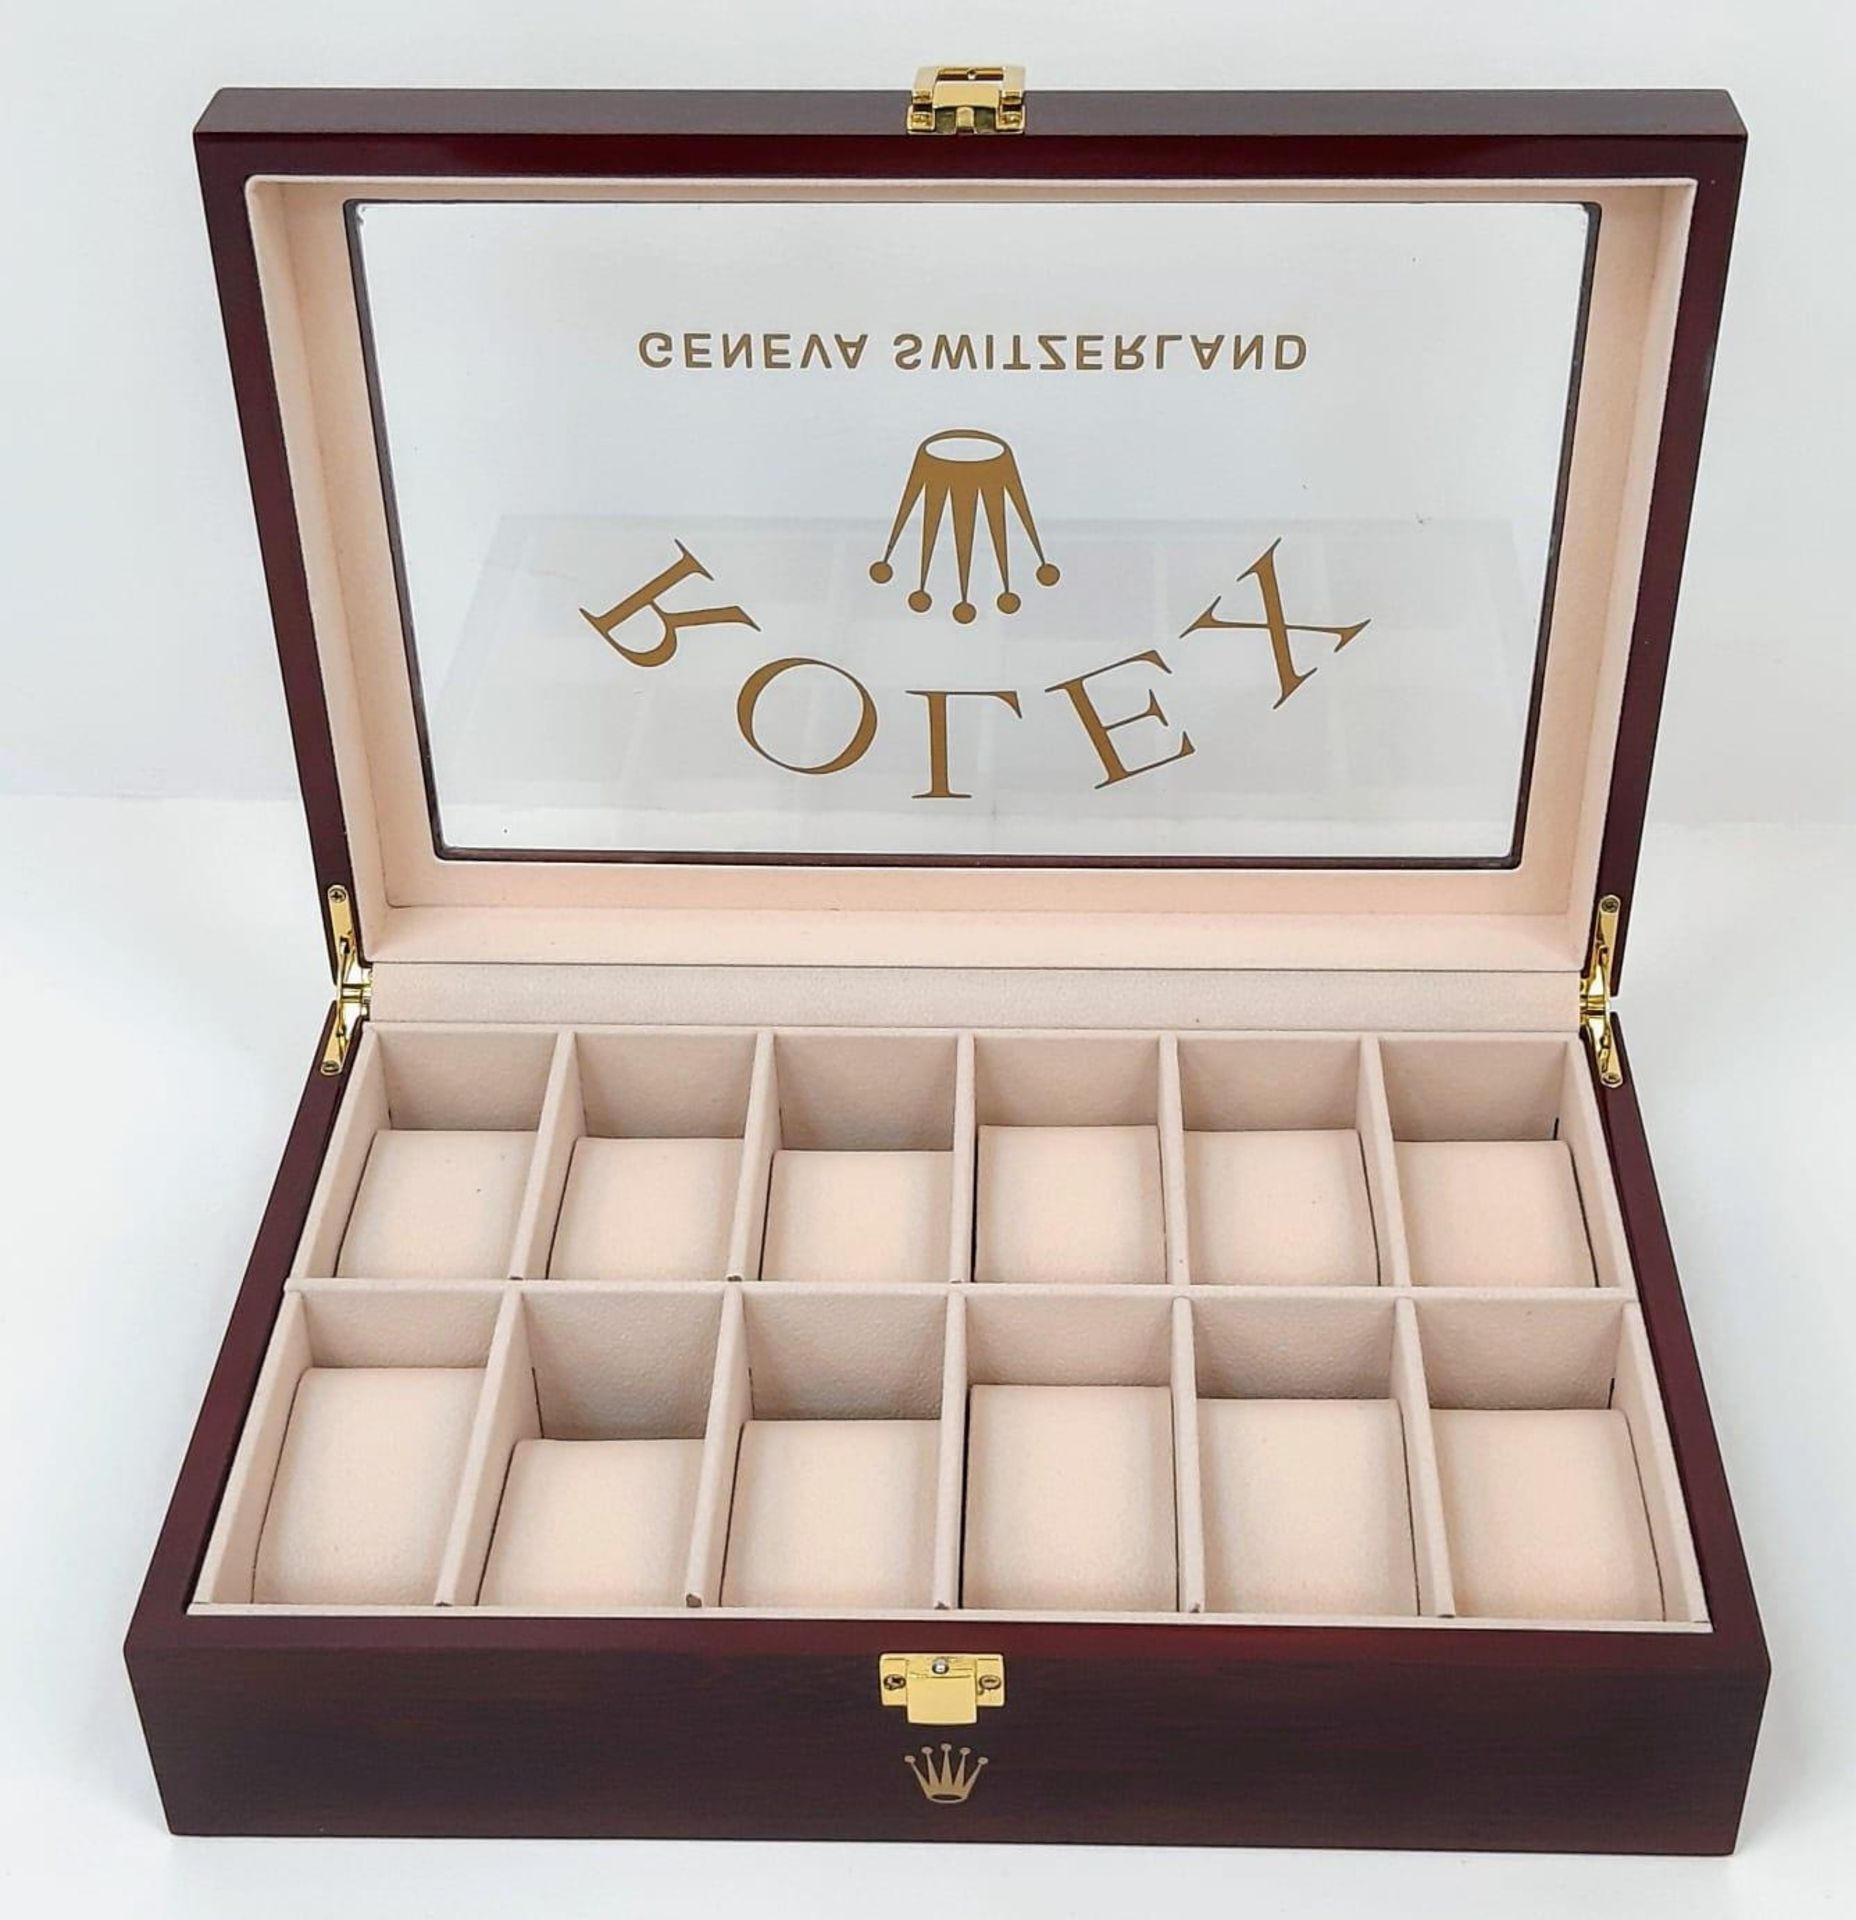 A high-quality wooden watch case for 12 watches (often used by ROLEX and OMEGA dealers) made from